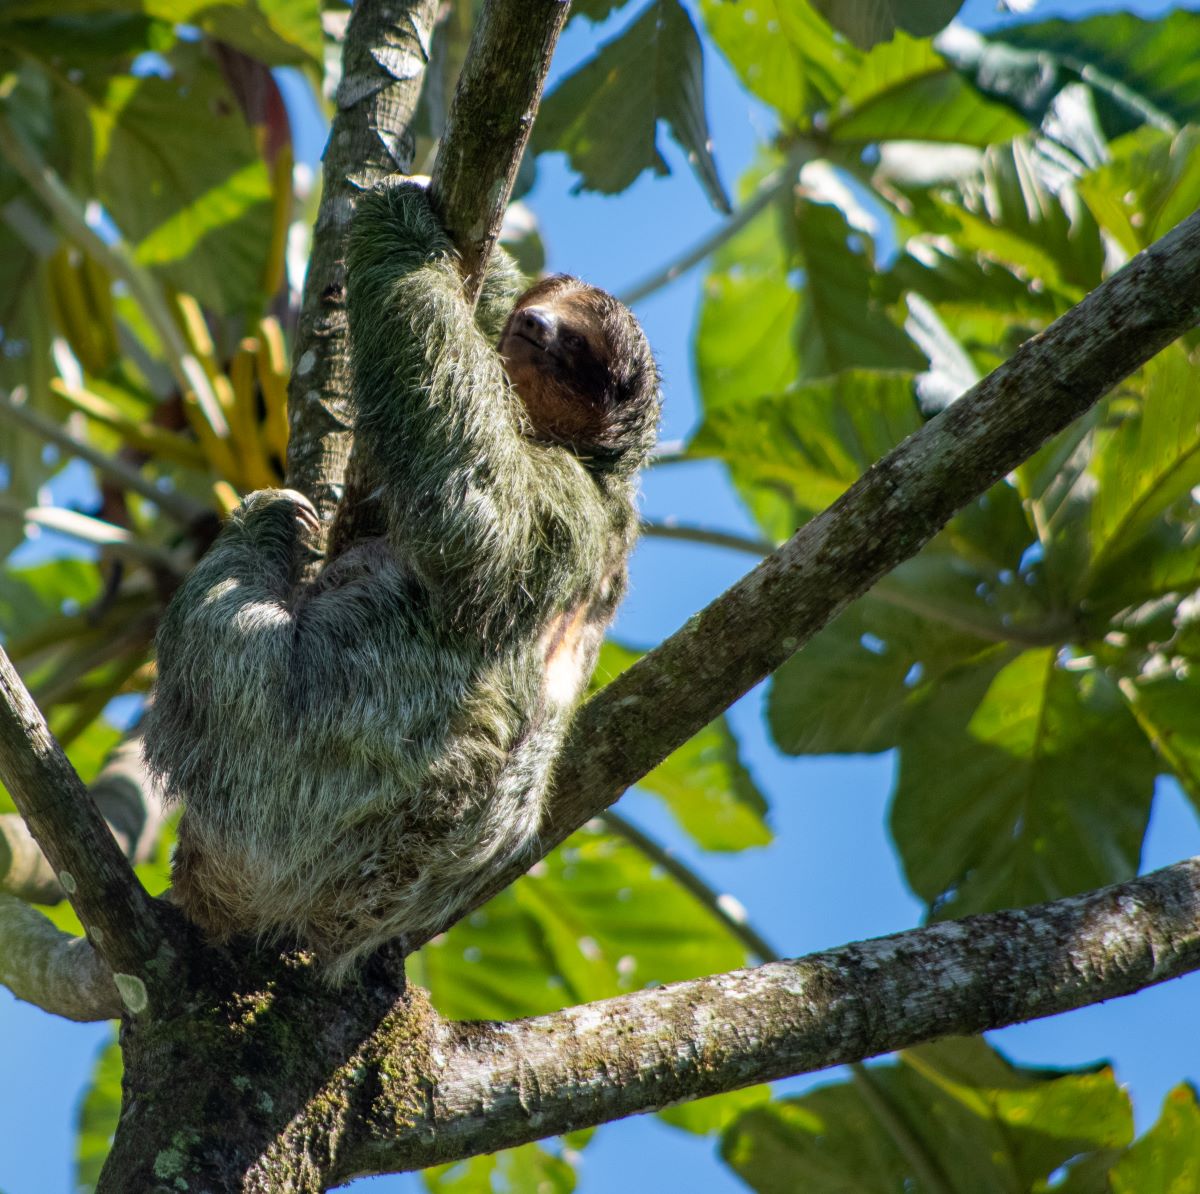 The sloth is one of Costa Rica's most well-known wildlife members.